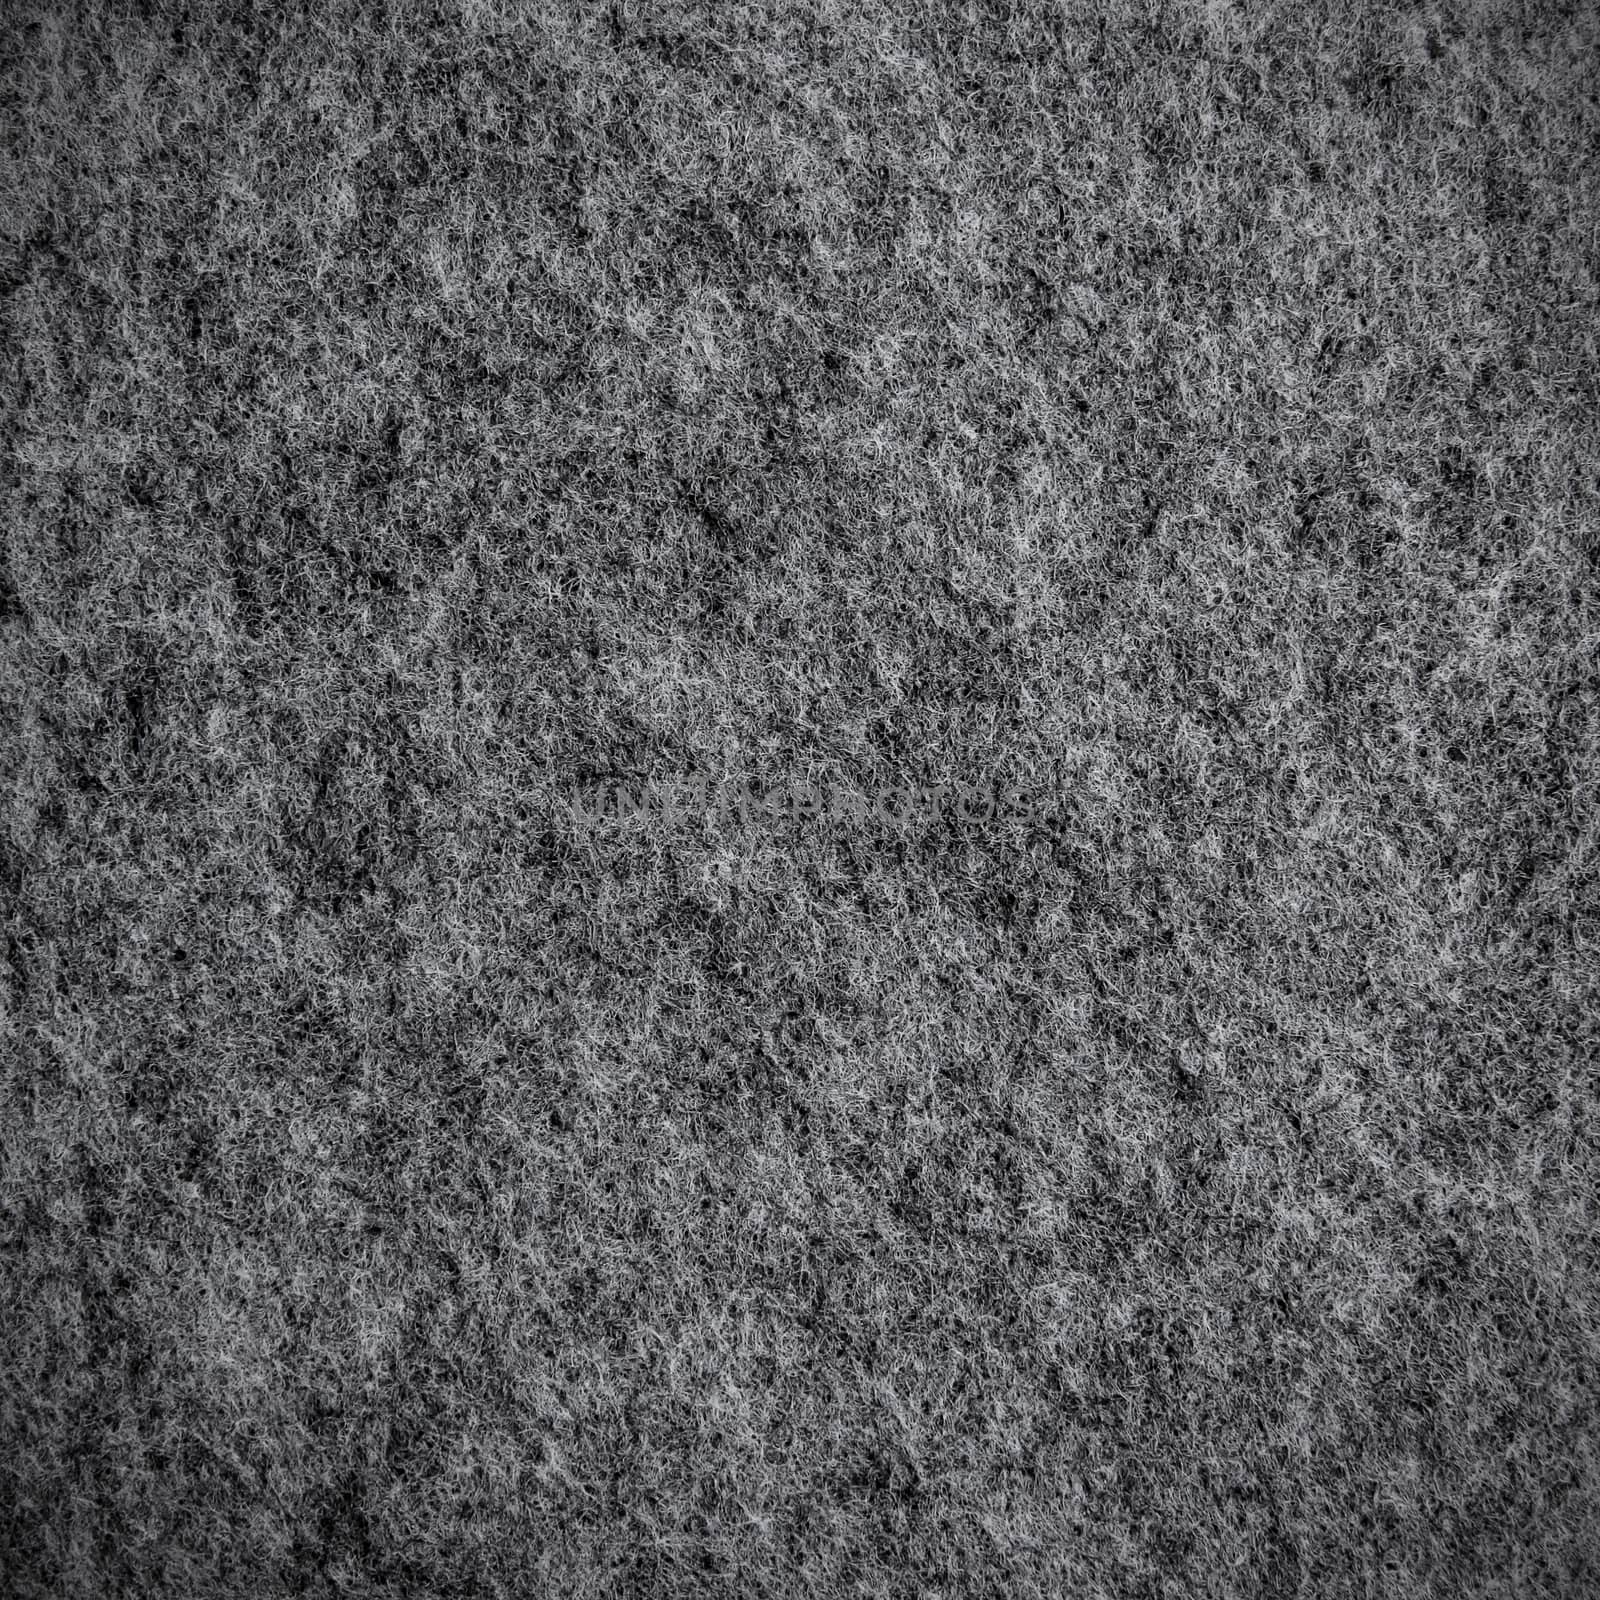 Close-up grey carpet texture with for background